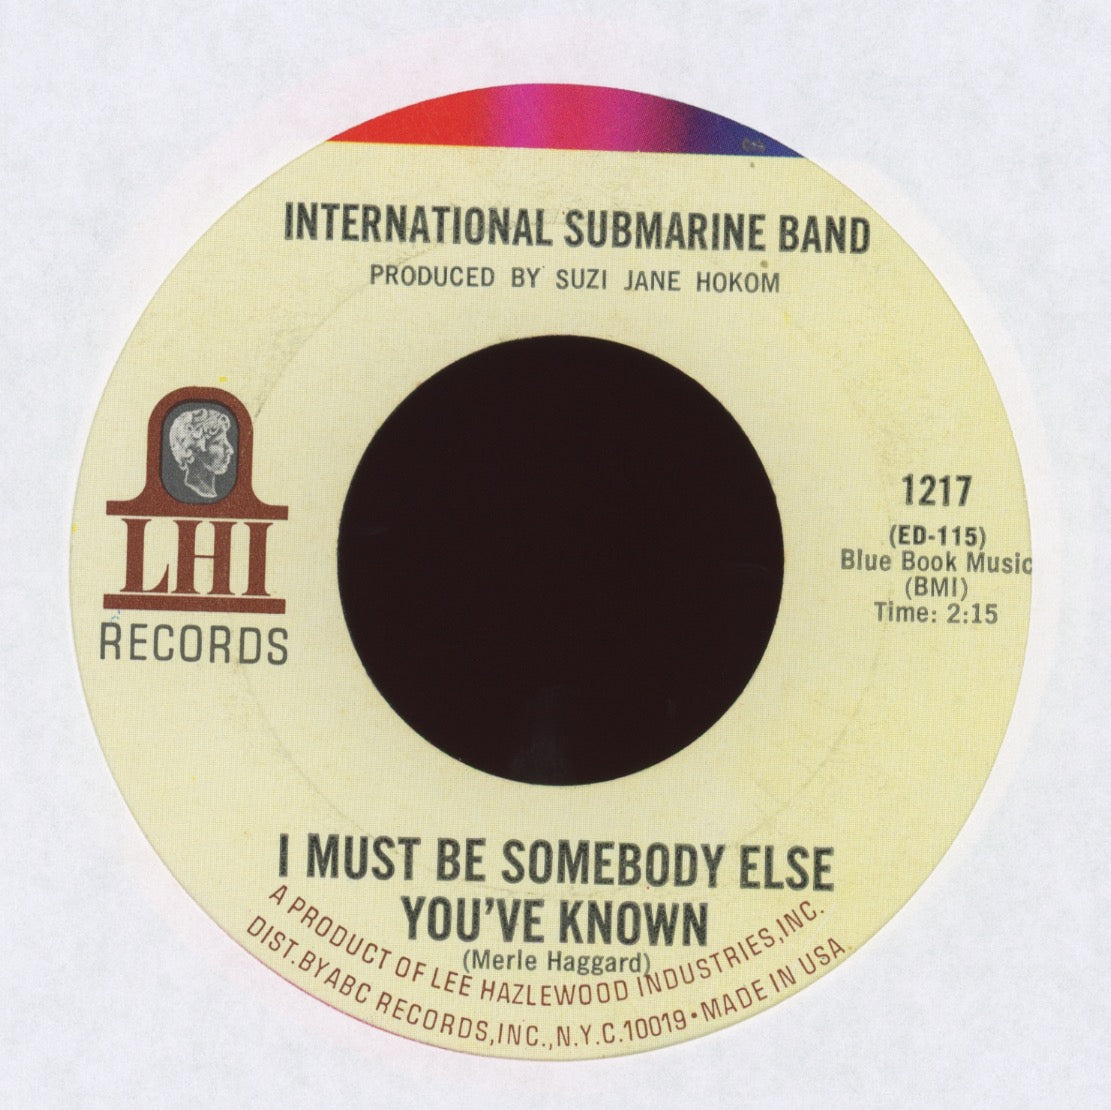 The International Submarine Band - I Must Be Somebody Else You've Known on LHI